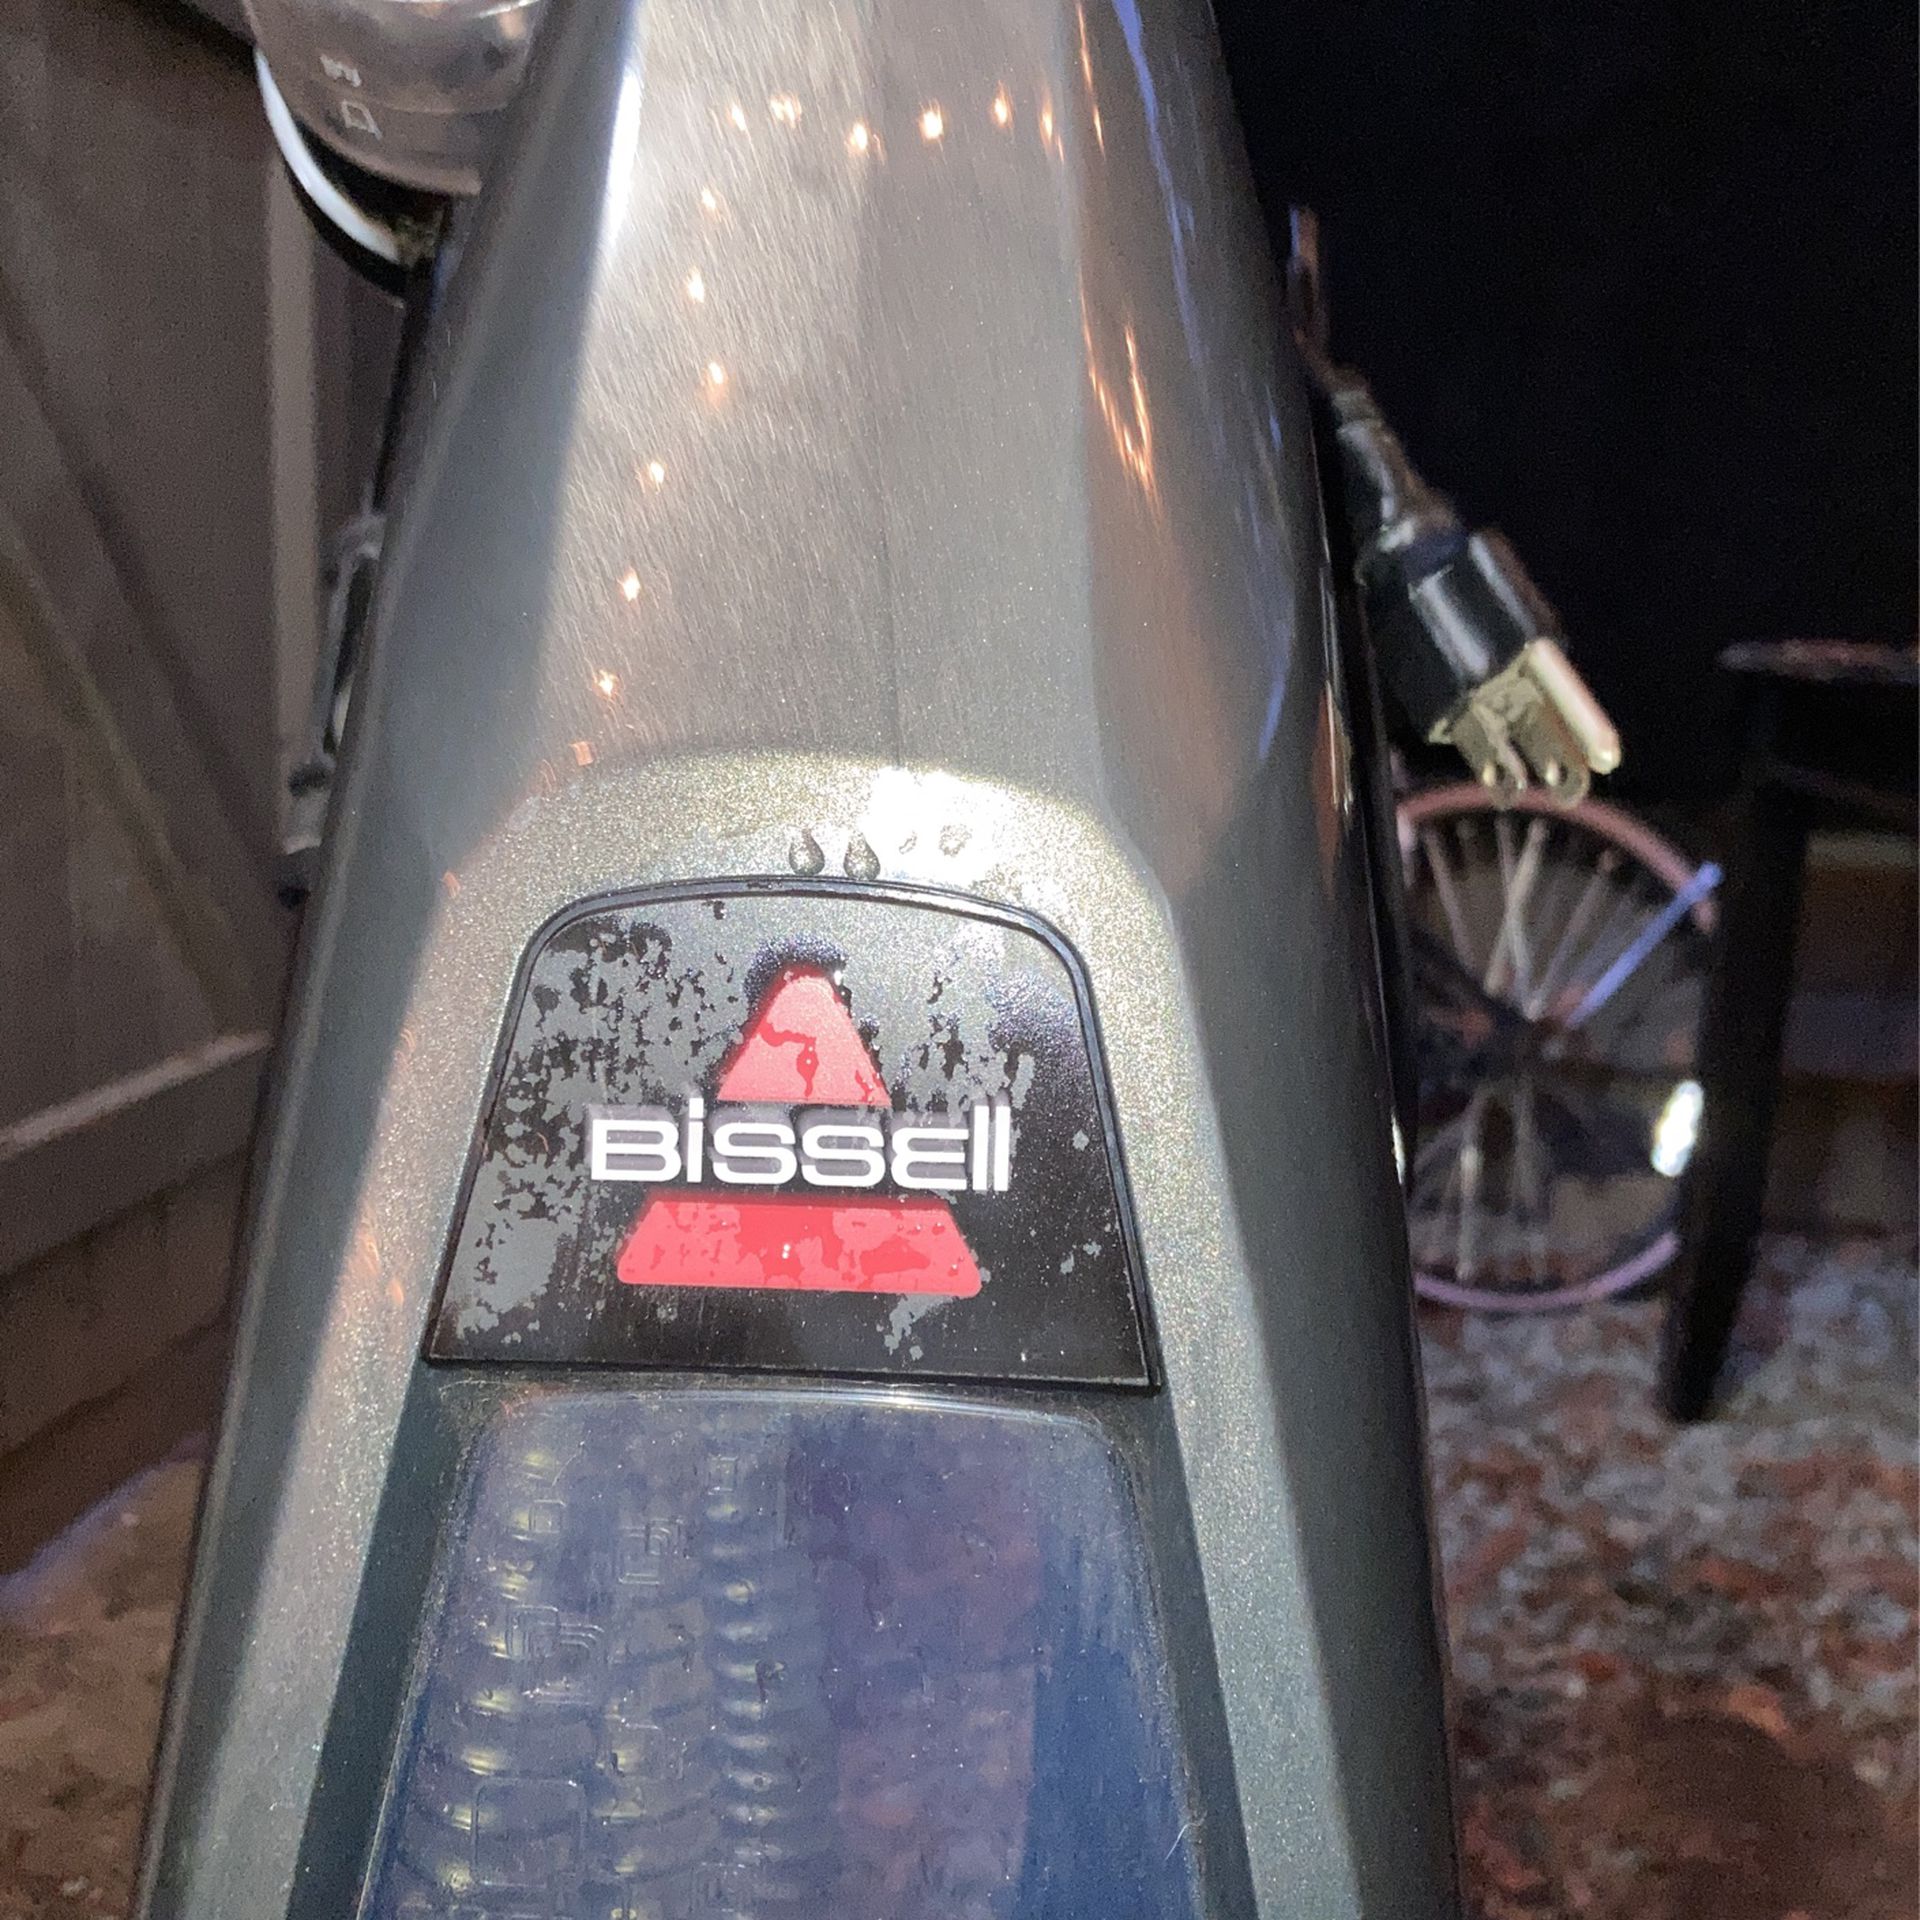 bissell deep clean proheat 2x 